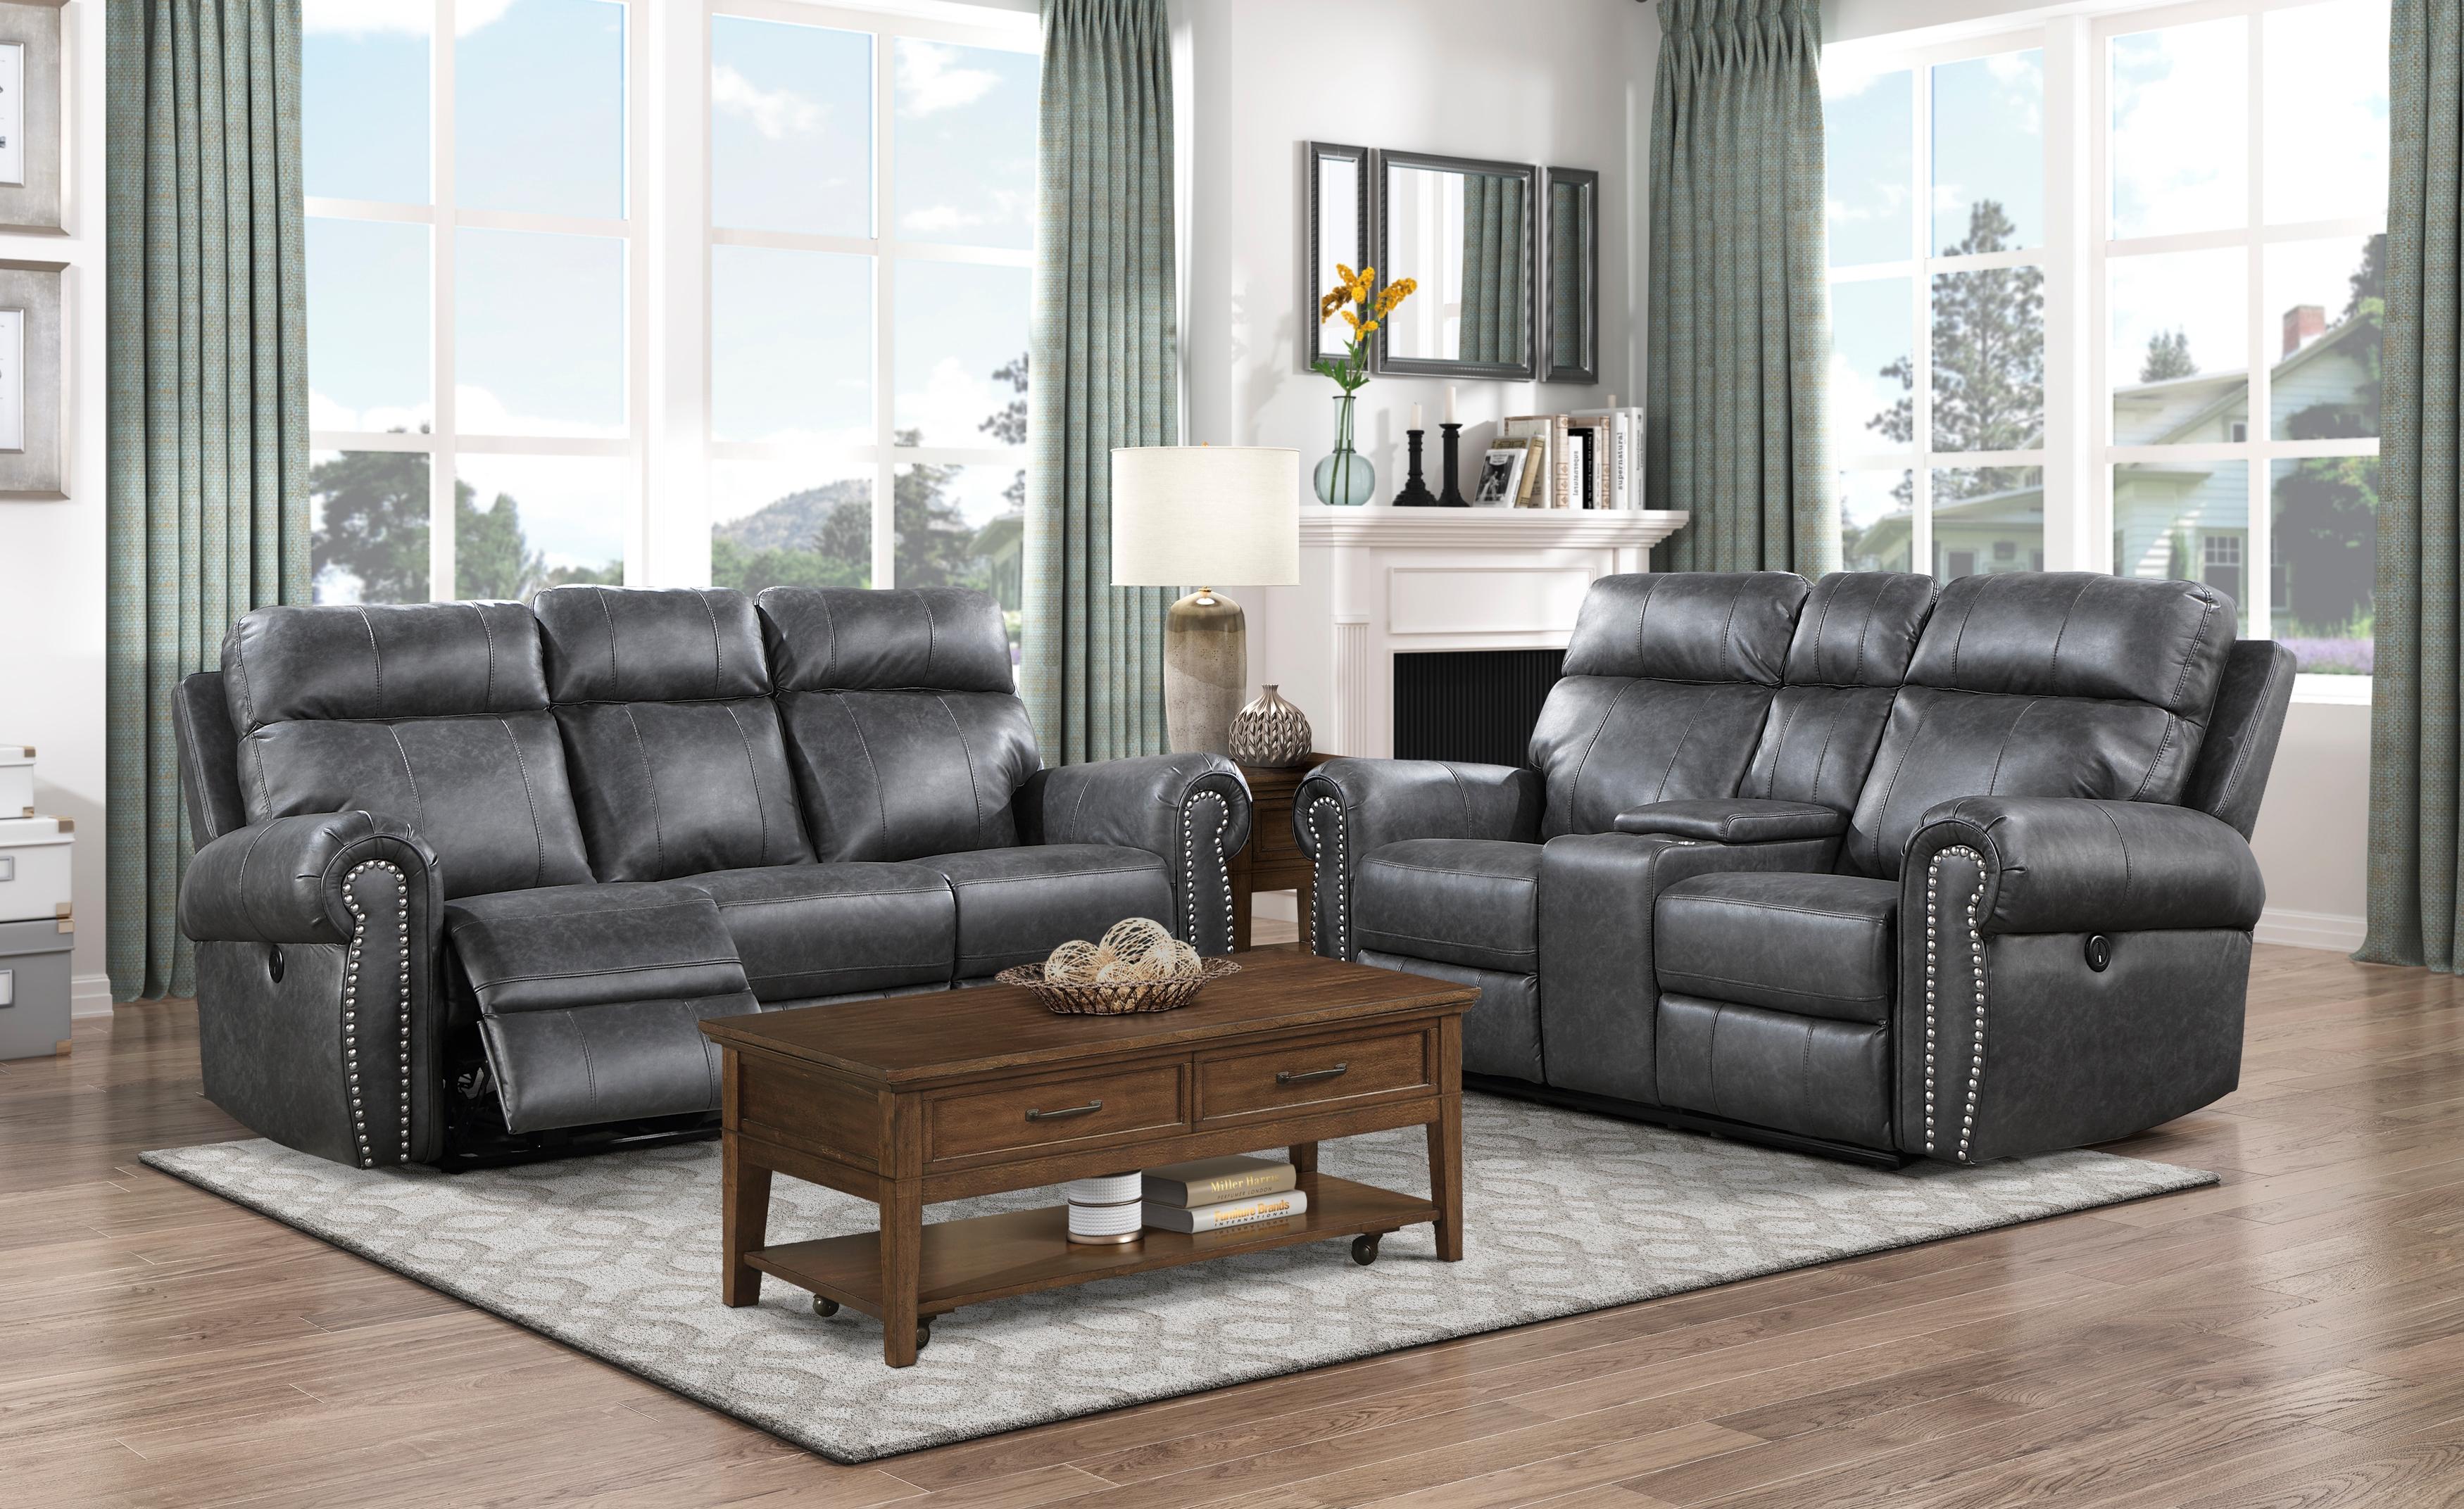 Transitional Reclining Set 9488GY-2PC Granville 9488GY-2PC in Gray Suede